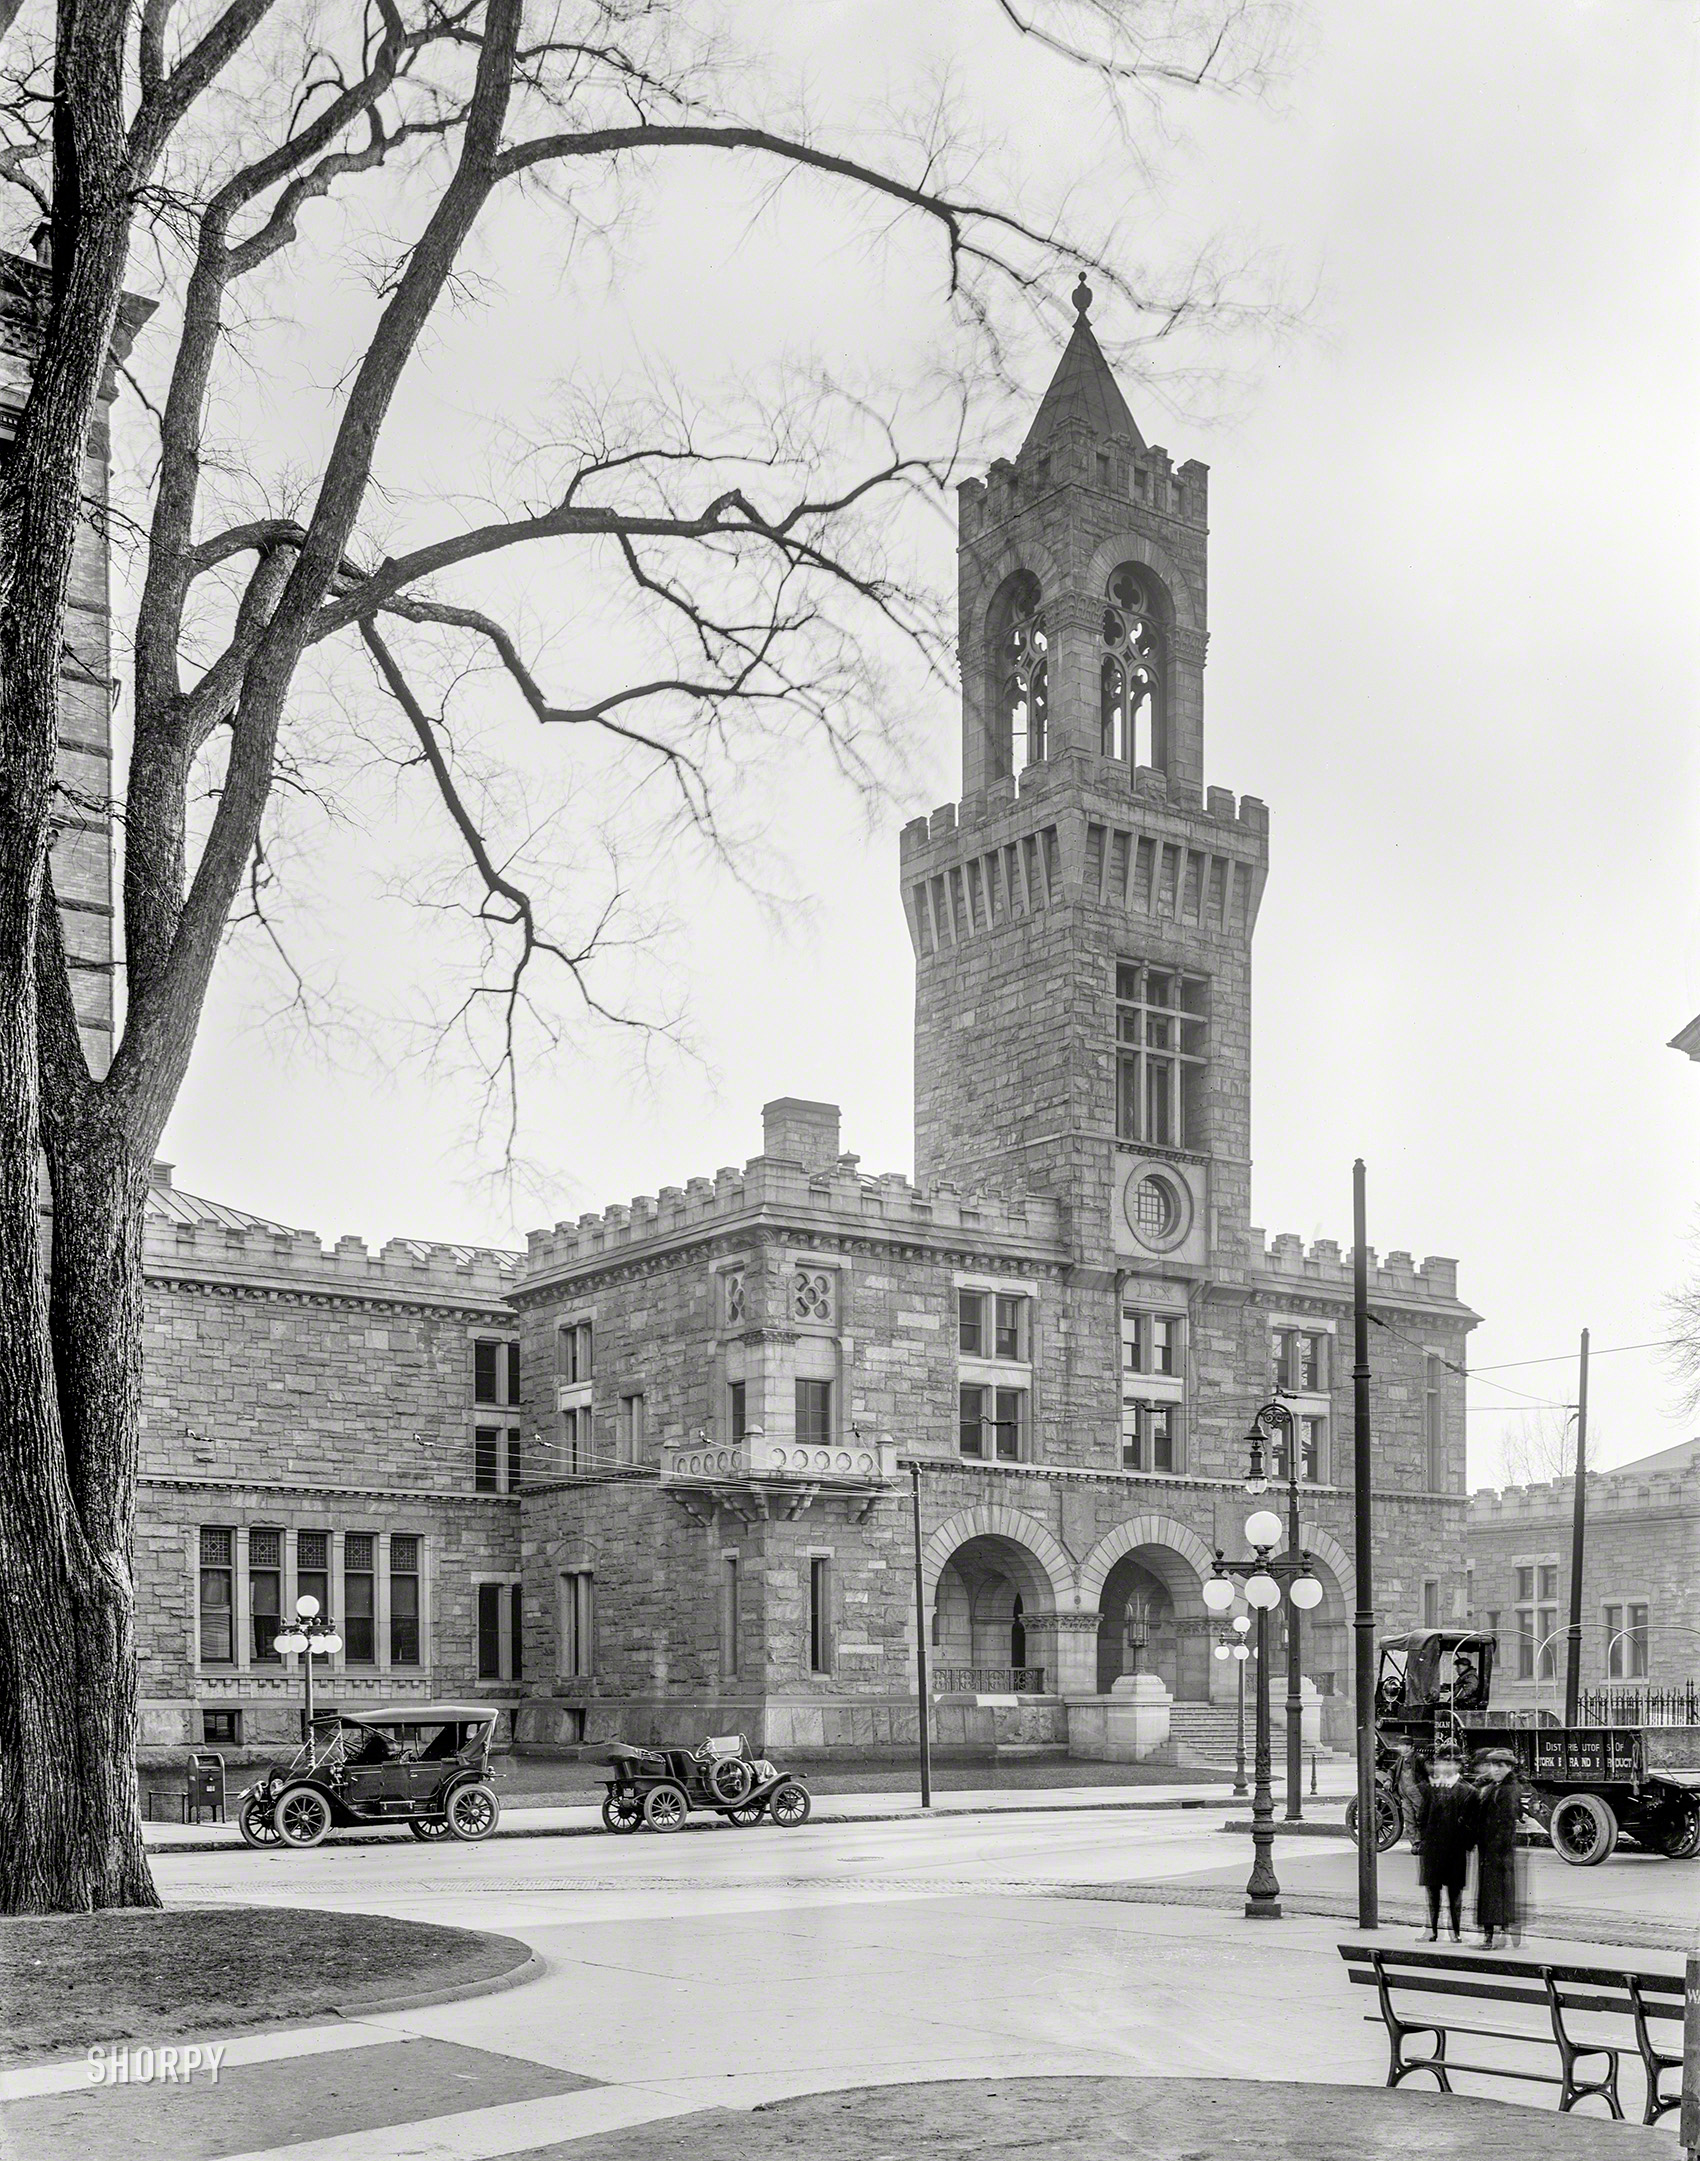 Circa 1910. "Courthouse -- Springfield, Massachusetts." 8x10 inch dry plate glass negative, Detroit Publishing Company. View full size.